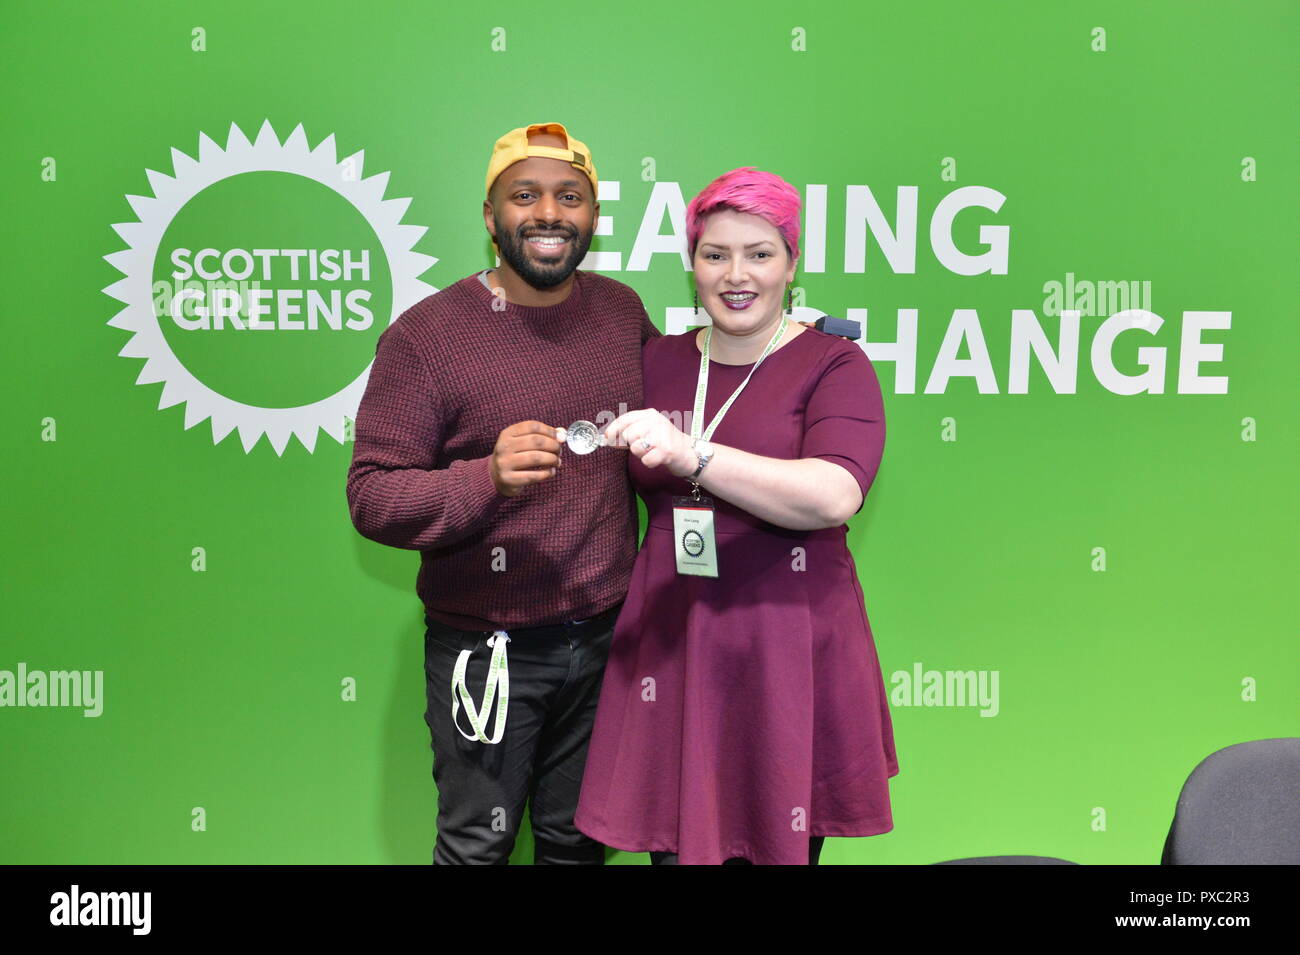 Glasgow, UK. 21st Oct 2018. Leading The Change. Scottish Green Party National Conference. Pictured (left) Magid Magid - Lord Mayor of Sheffield being presented with a silver quaich by (right) Kim Long - Councillor for Dennstoun, Glasgow. Credit: Colin Fisher/Alamy Live News Stock Photo